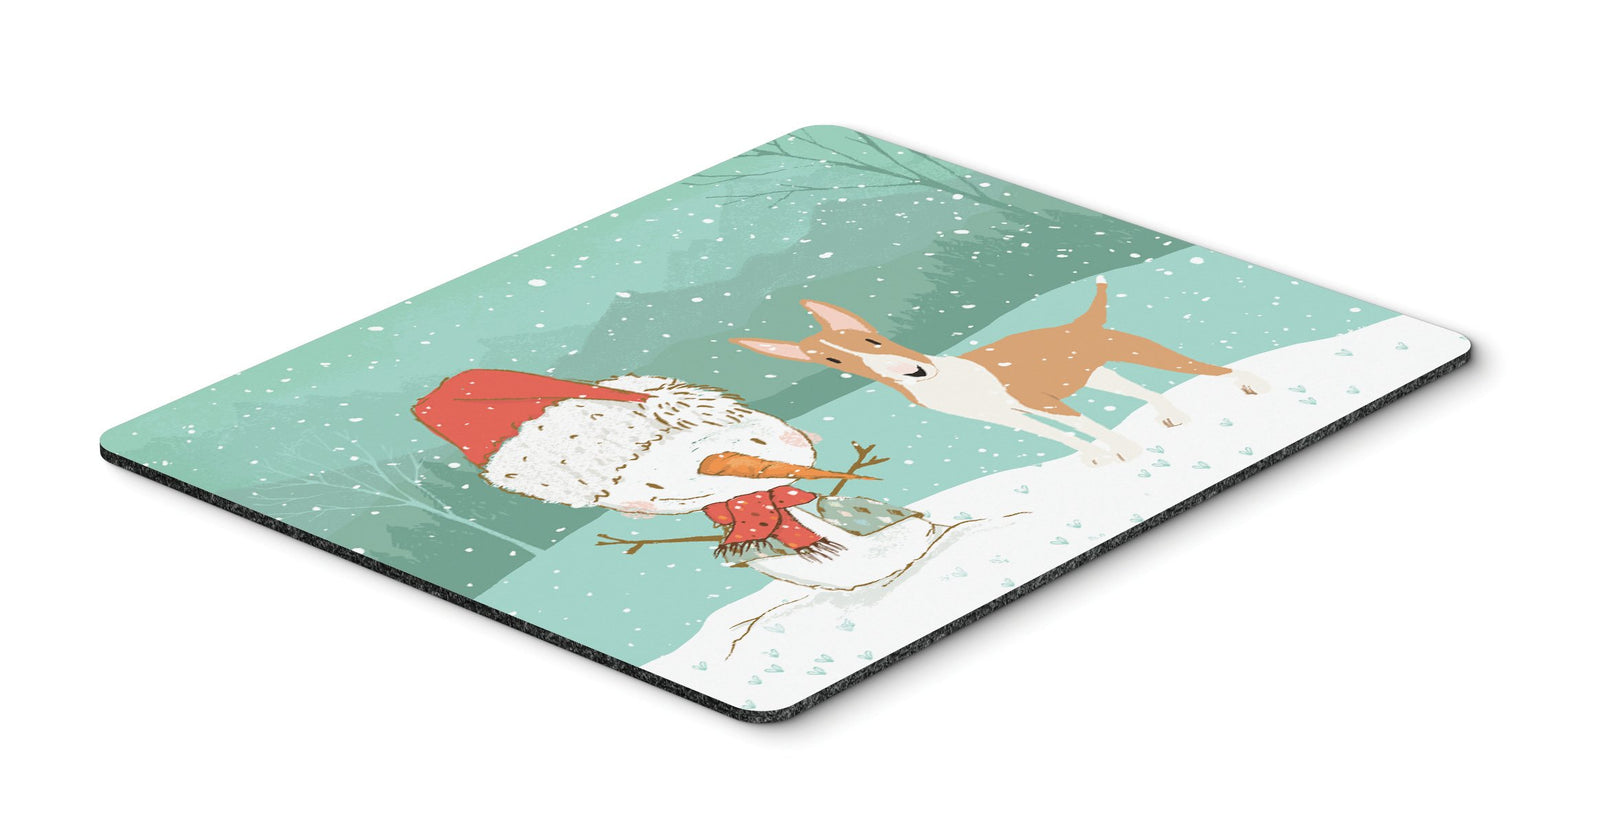 Fawn Bull Terrier Snowman Christmas Mouse Pad, Hot Pad or Trivet CK2056MP by Caroline's Treasures